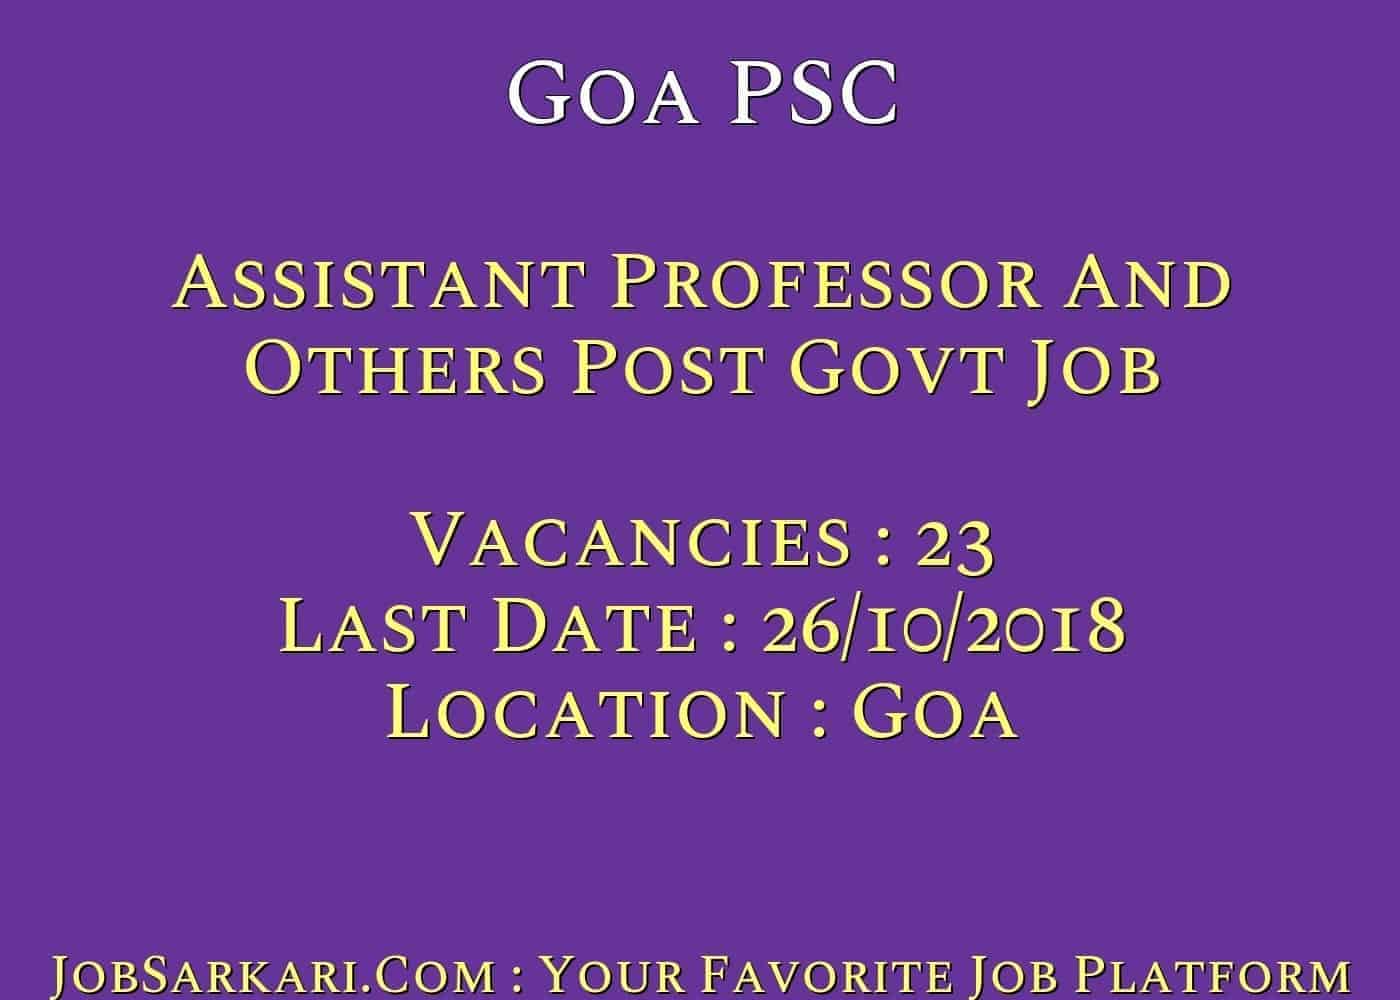 Goa PSC Recruitment 2018 For Assistant Professor And Others Post Govt Job